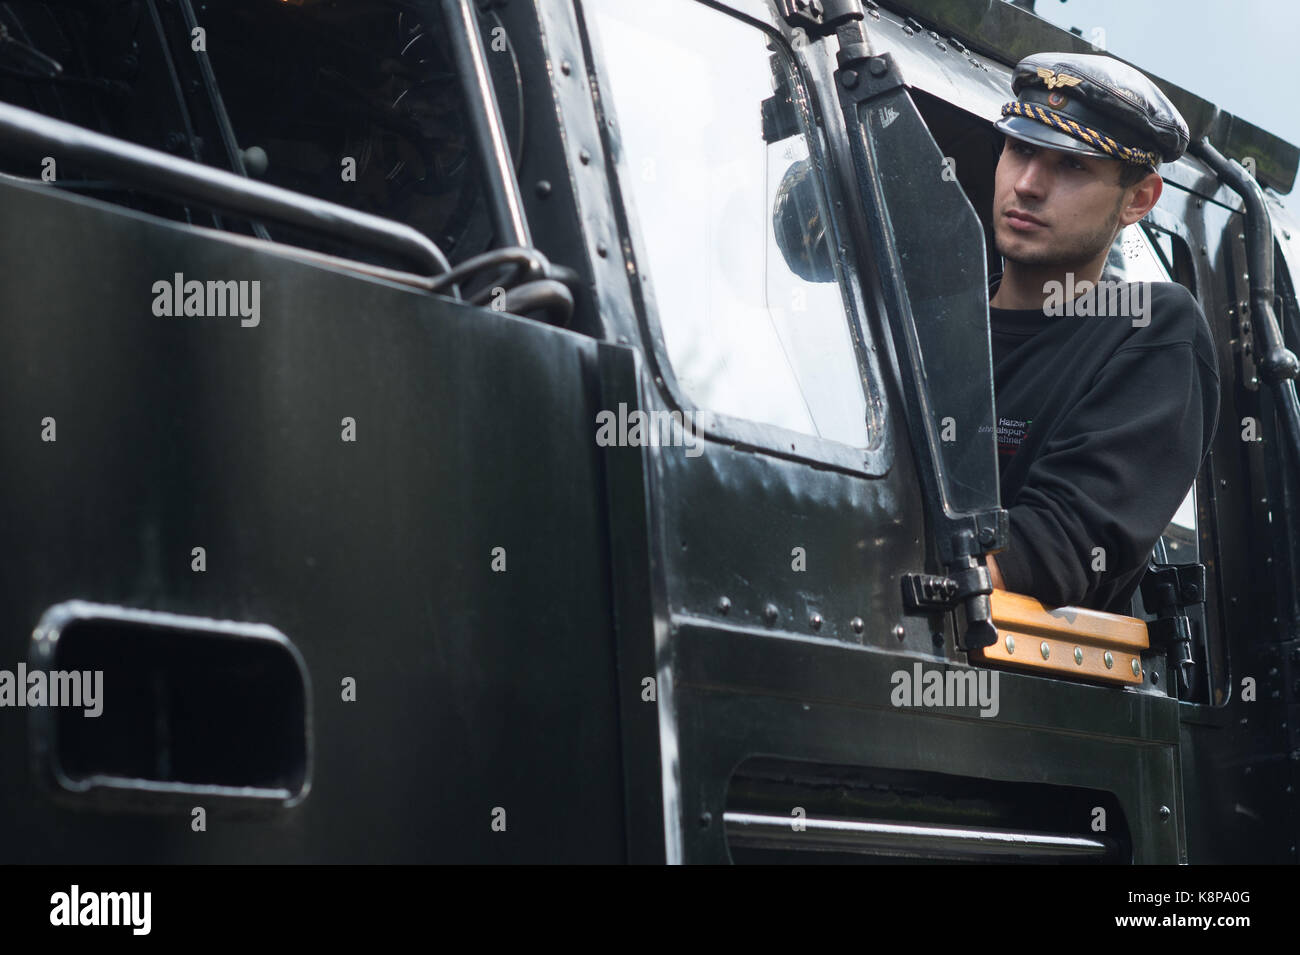 Drei Annen Hohne, Germany. 18th Sep, 2017. Tobias Hinsche of the Harzer Schmalspurbahn (lit. Harz narrow gauge railway) looking out of the window of the newly built locomotive 99 7241 - 5, pulling in to the station at Drei Annen Hohne, Germany, 18 September 2017. Credit: Klaus-Dietmar Gabbert/dpa-Zentralbild/ZB/dpa/Alamy Live News Stock Photo